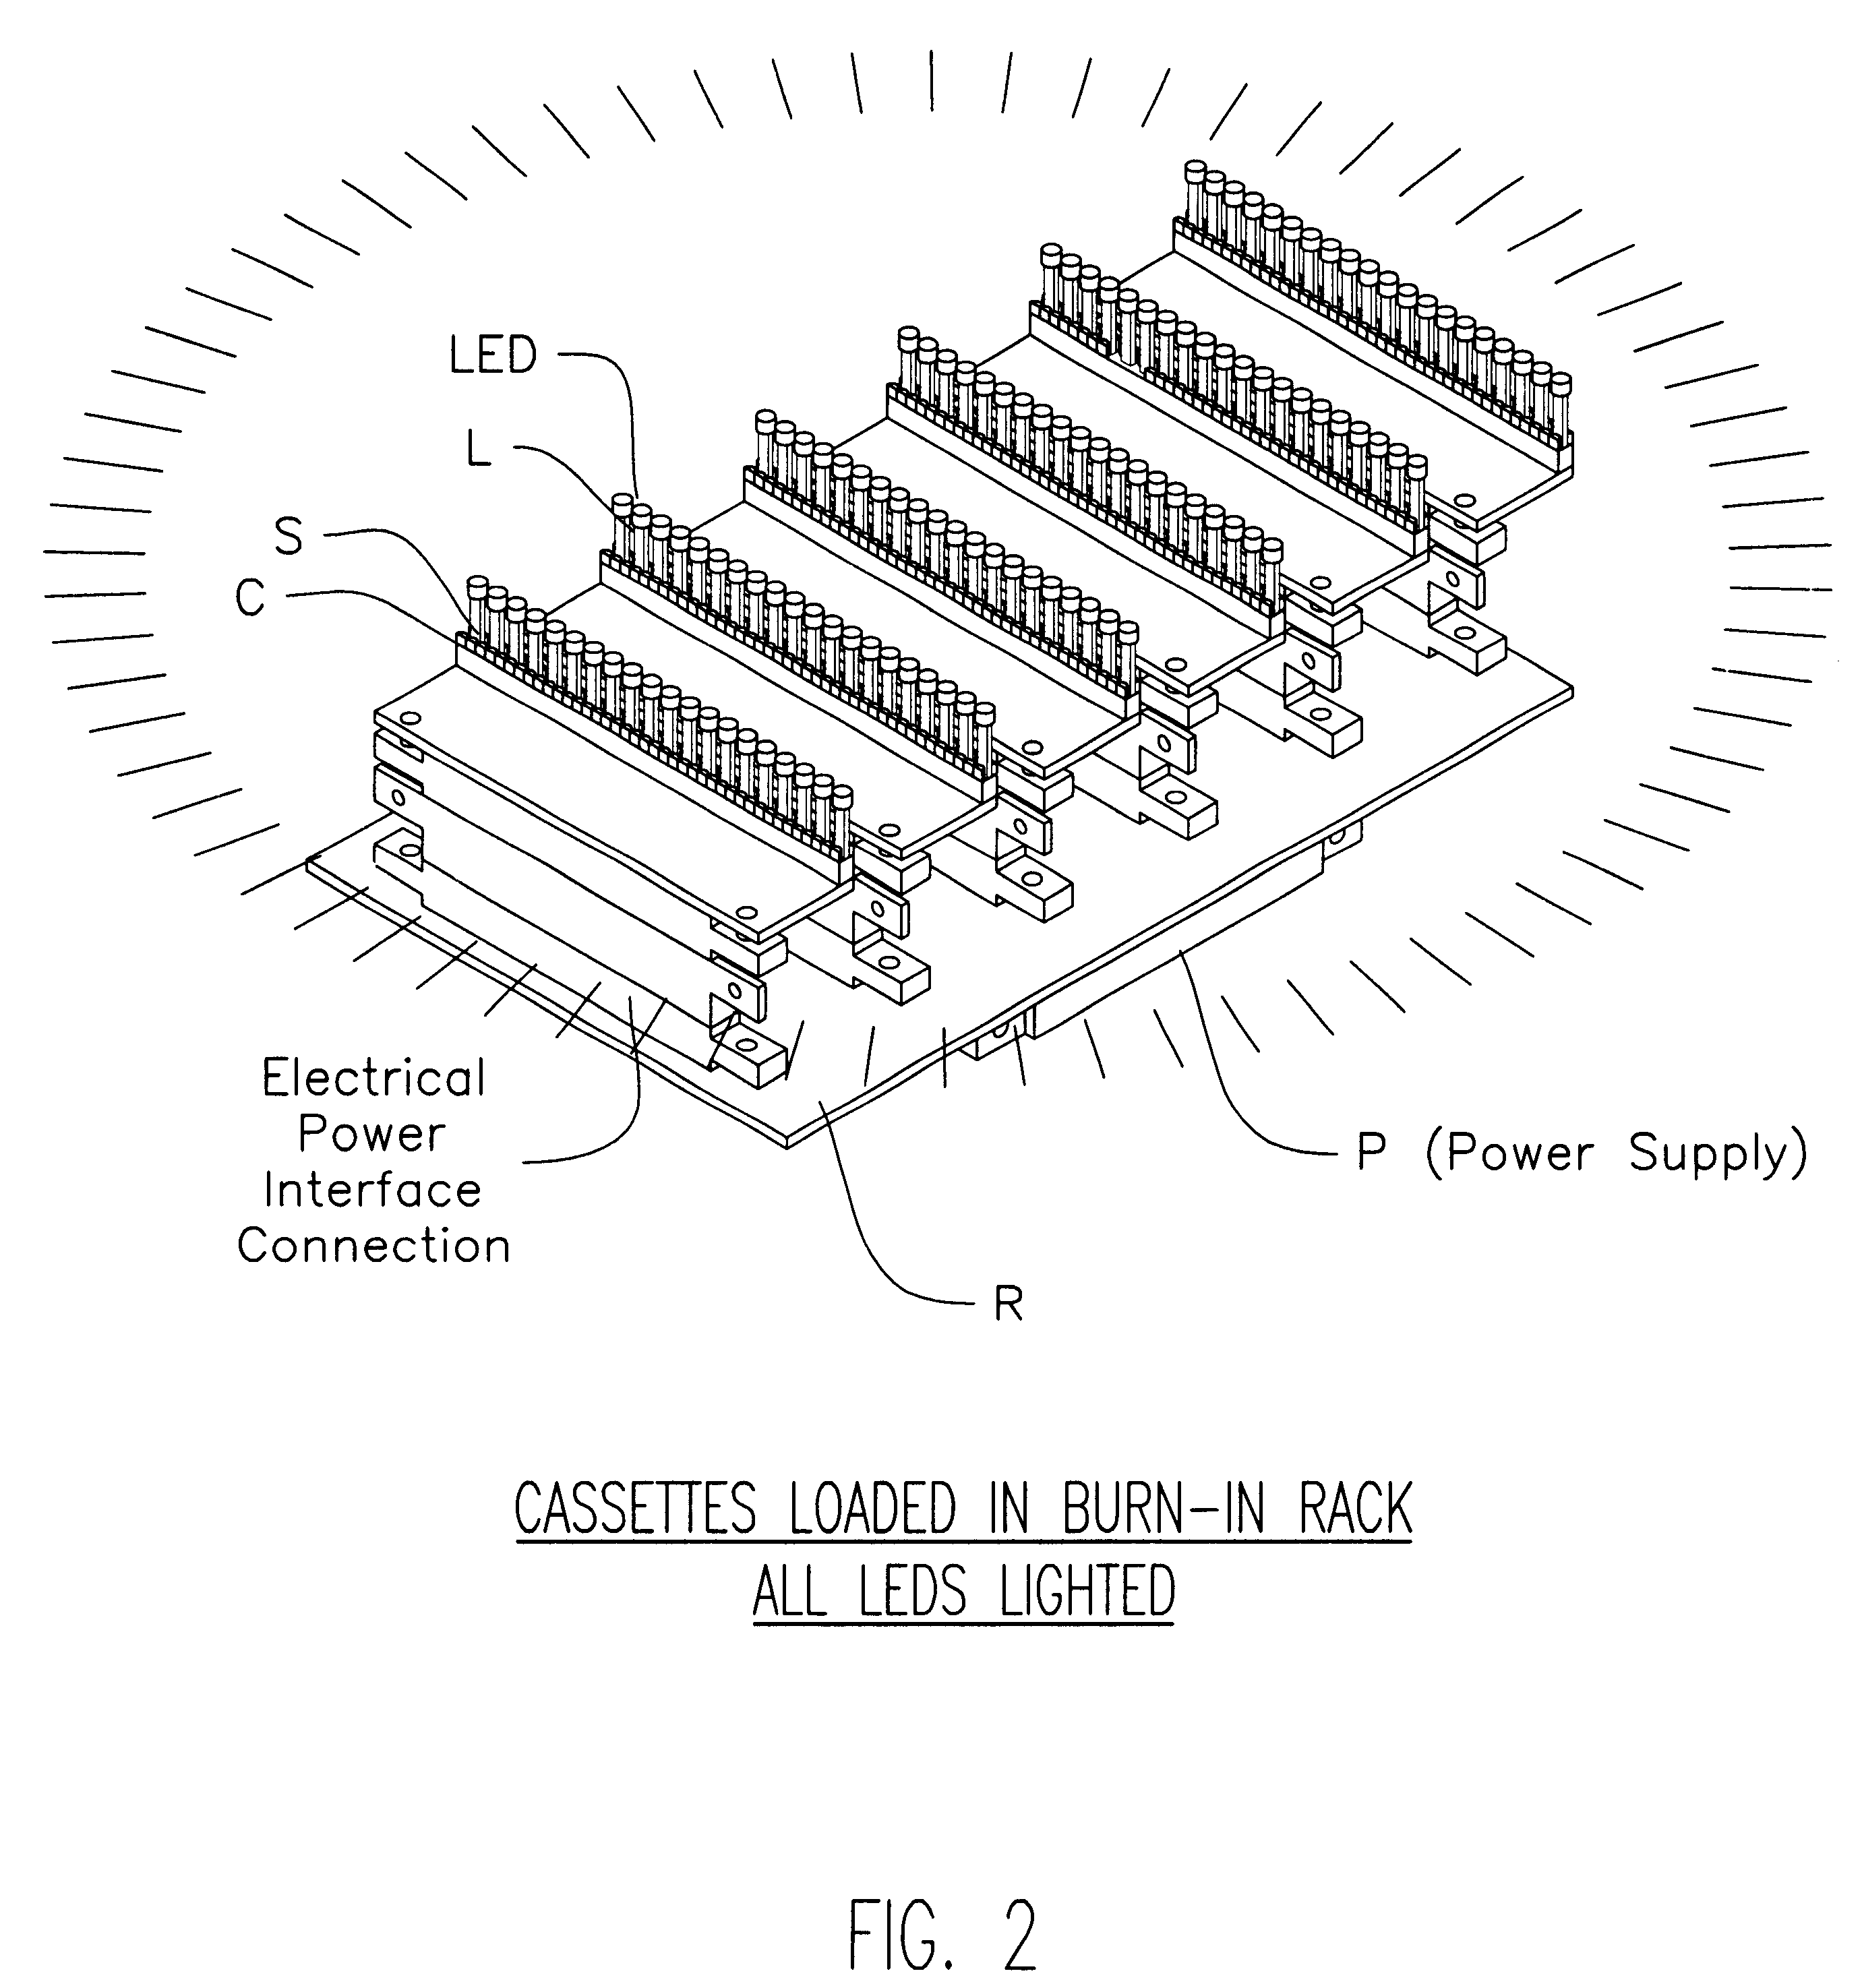 Method of and cassette structure for burn-in and life testing of multiple LEDs and the like